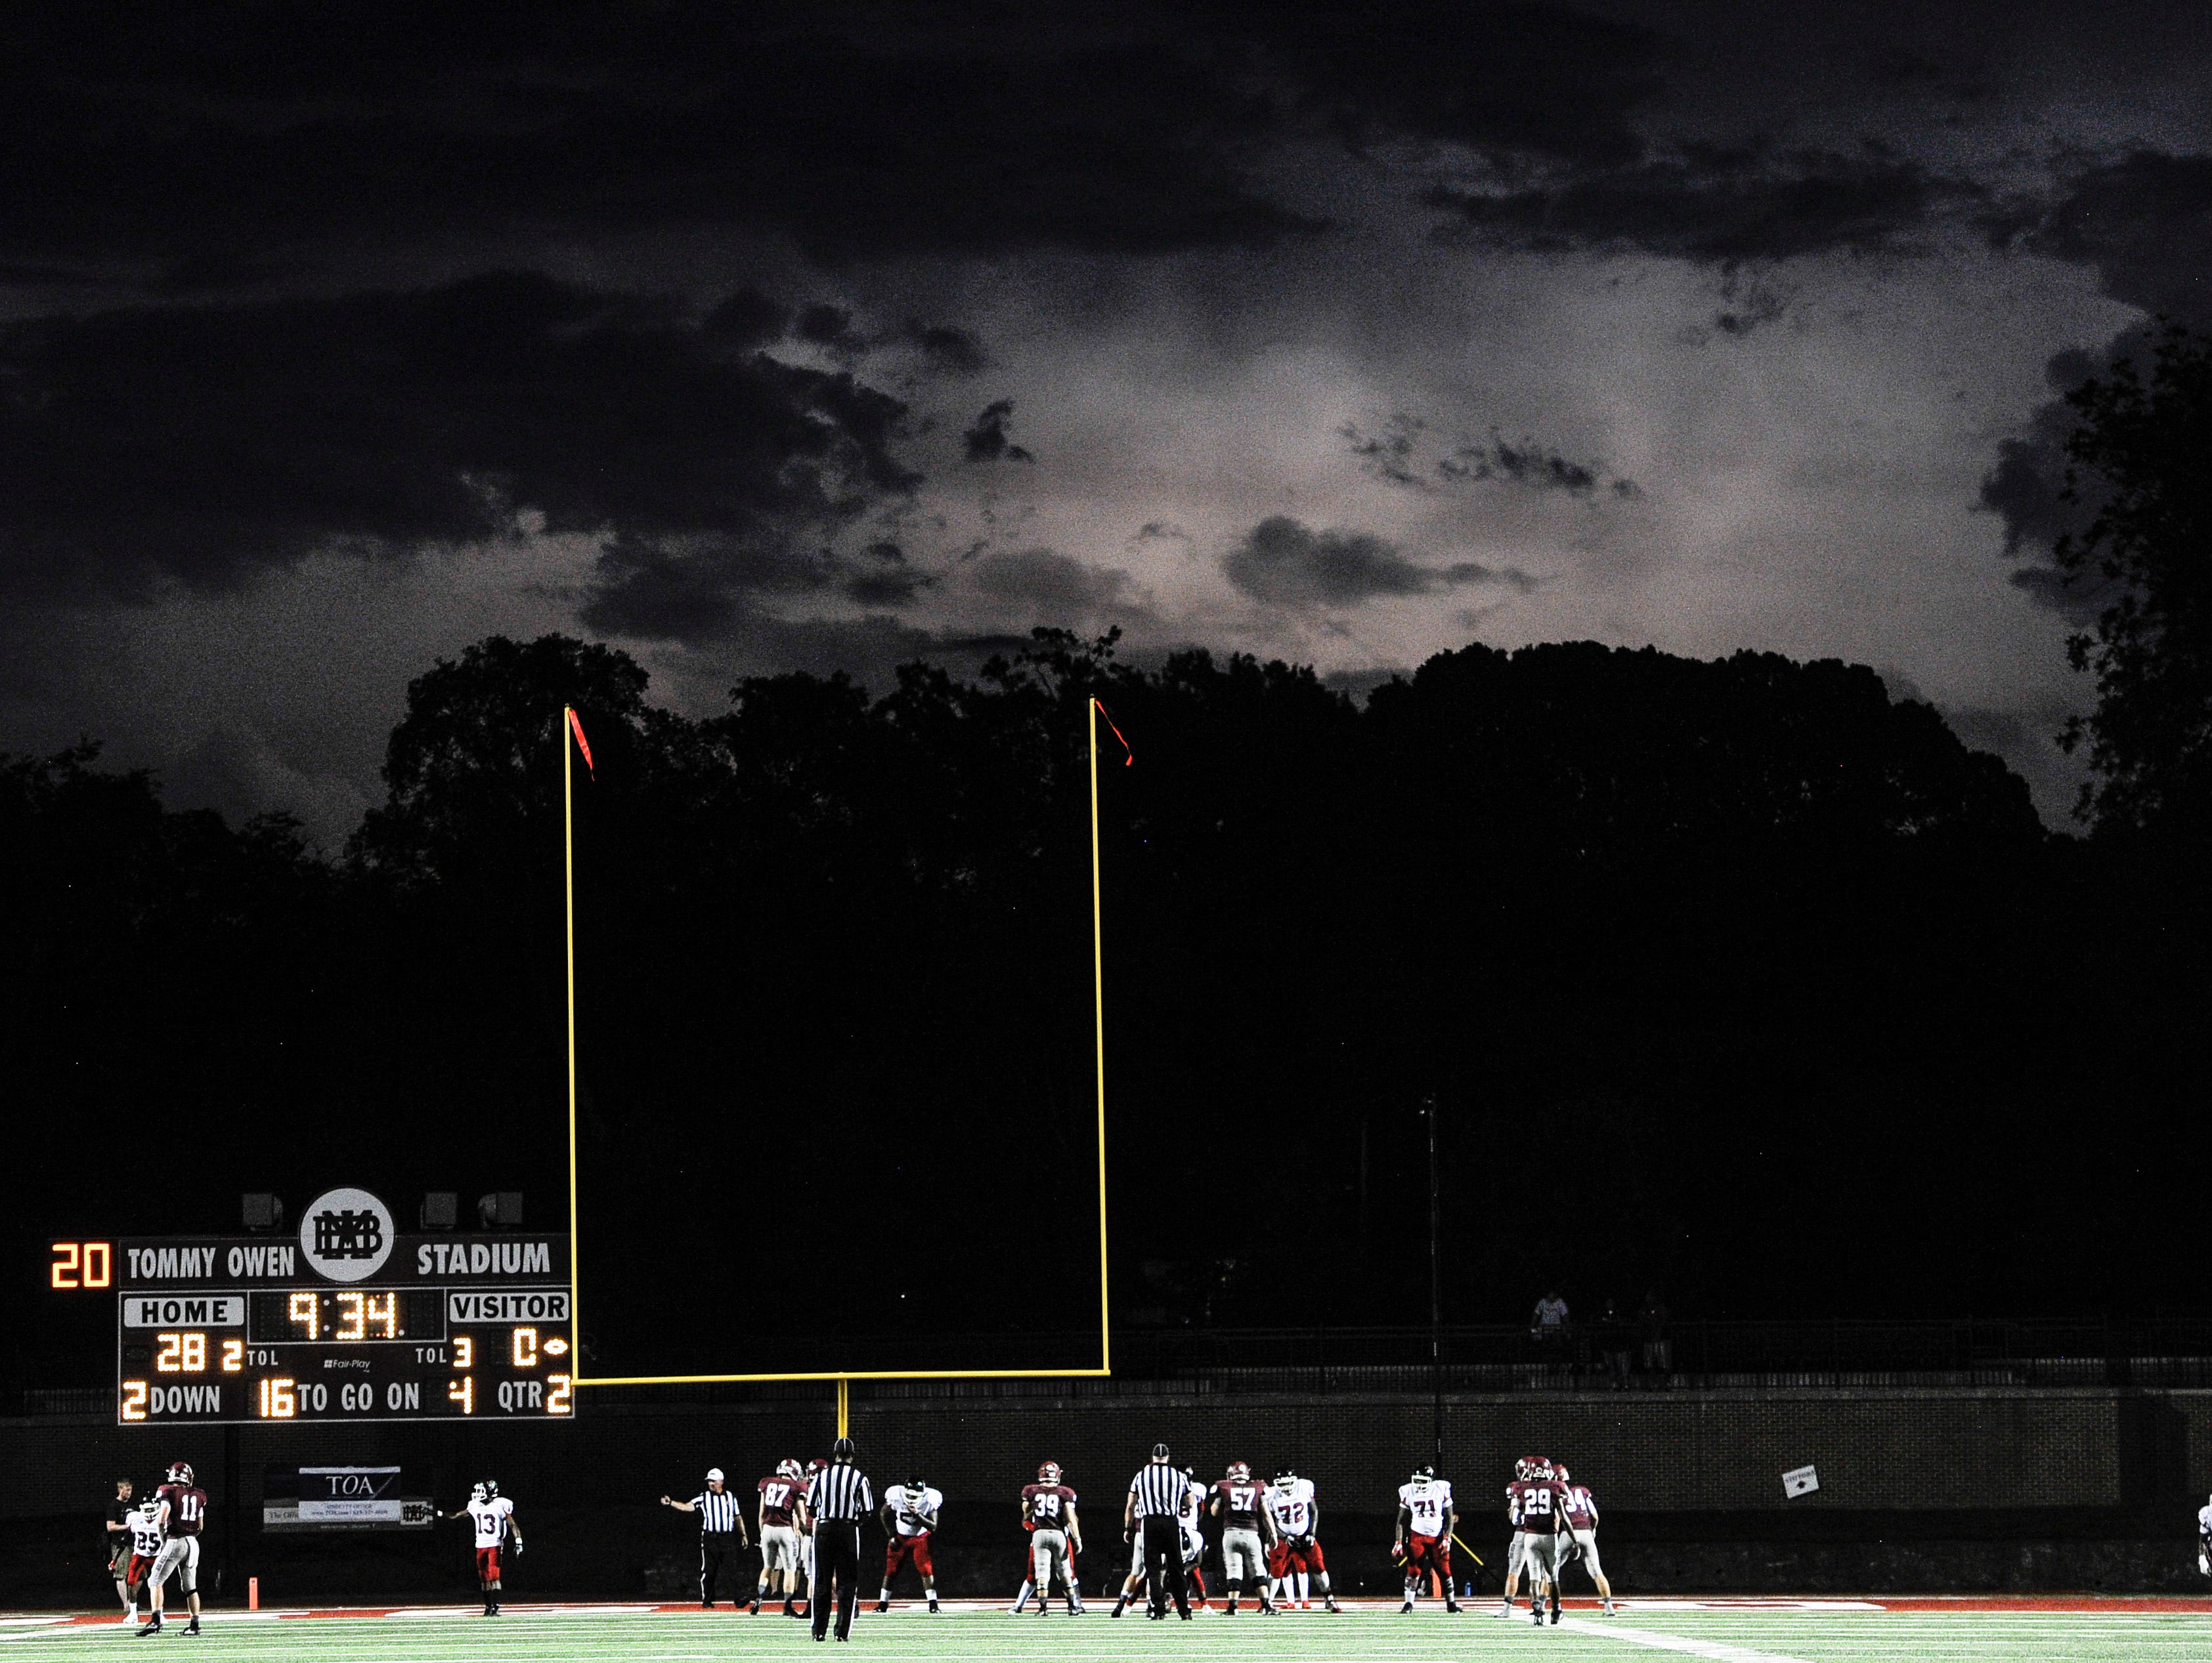 Lightning flashes in the sky as Pearl-Cohn and MBA play their game during the first half Friday Aug. 26, 2016, in Nashville, Tenn. A lightning delay was called during the second half of their game.